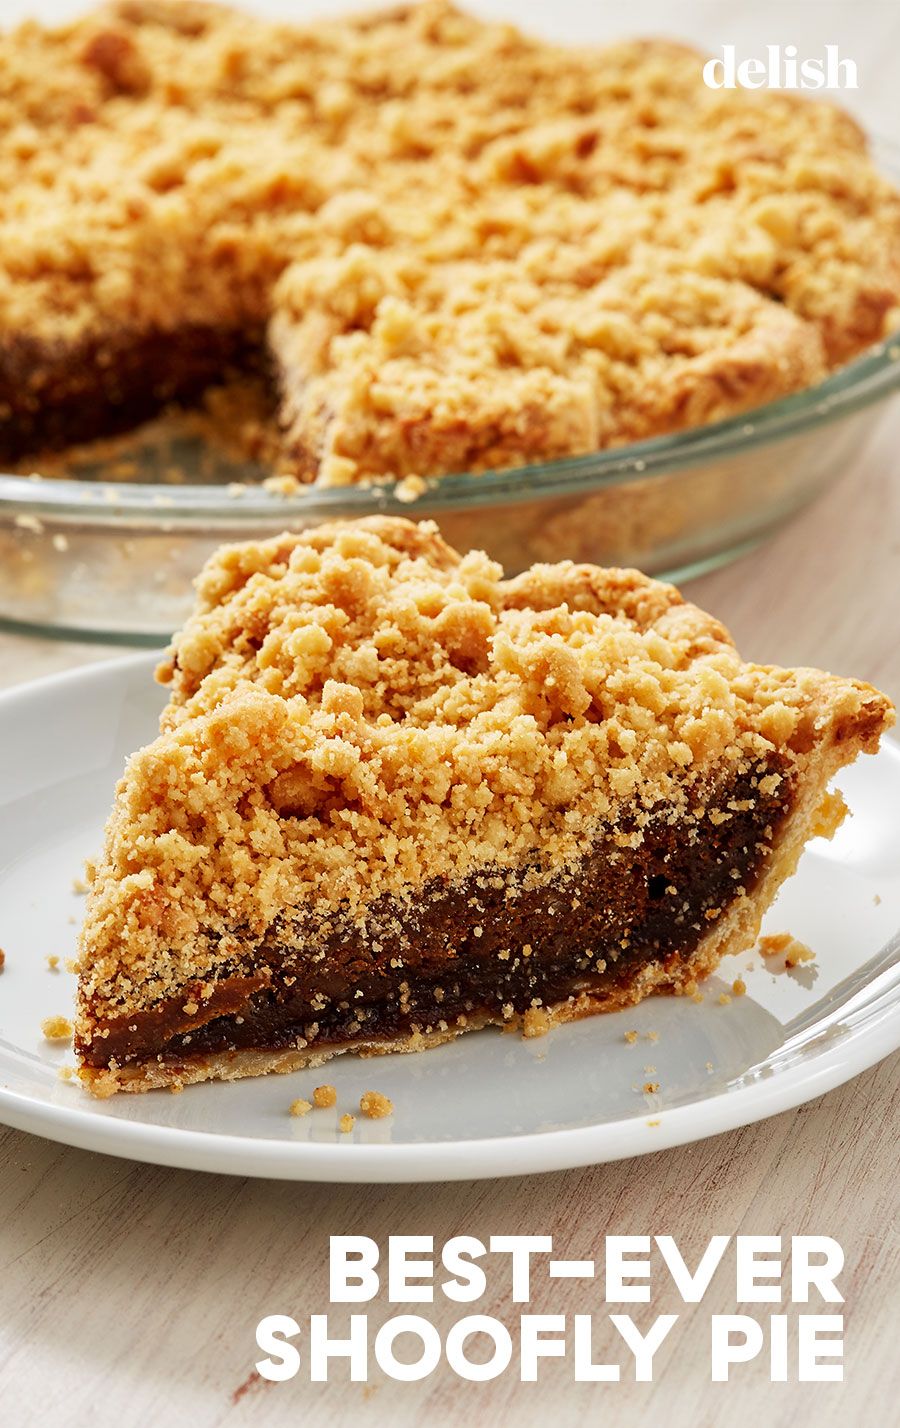 24 Favorite Holiday Pie Recipes | Midwest Living